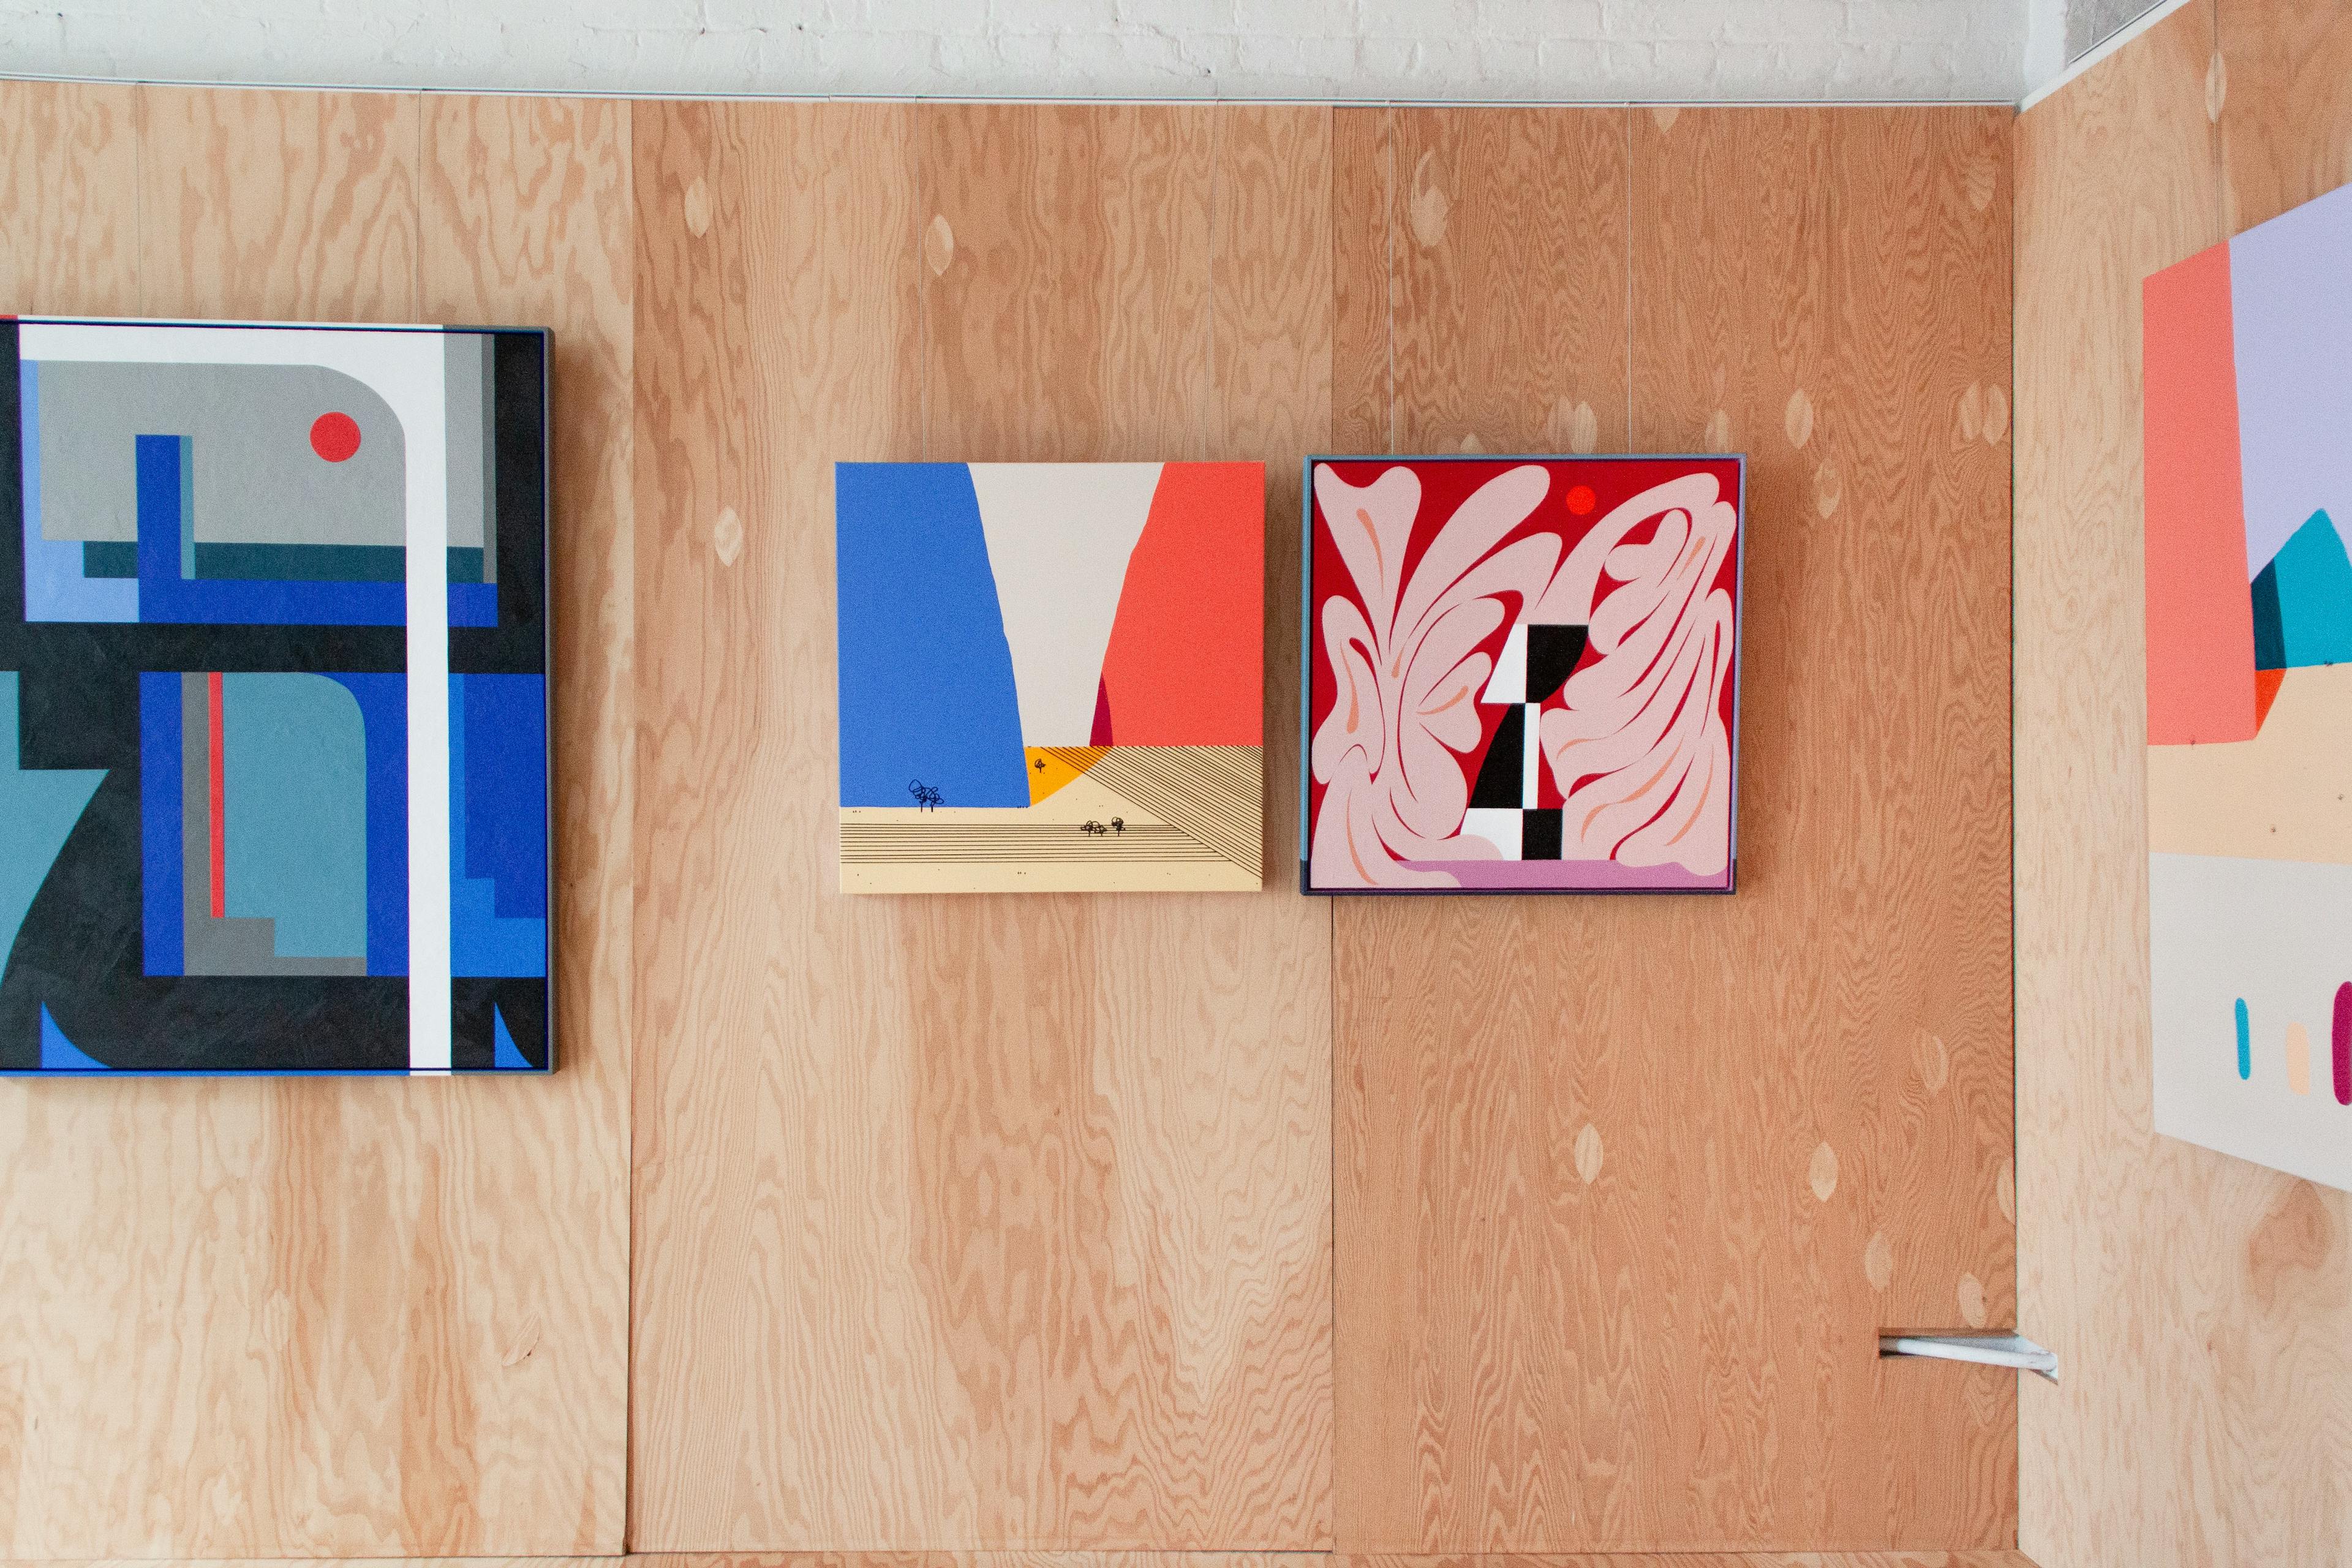 A gallery with wood walls displaying paintings by David Esquivel and Evi O for exhibition Universe, Understood.